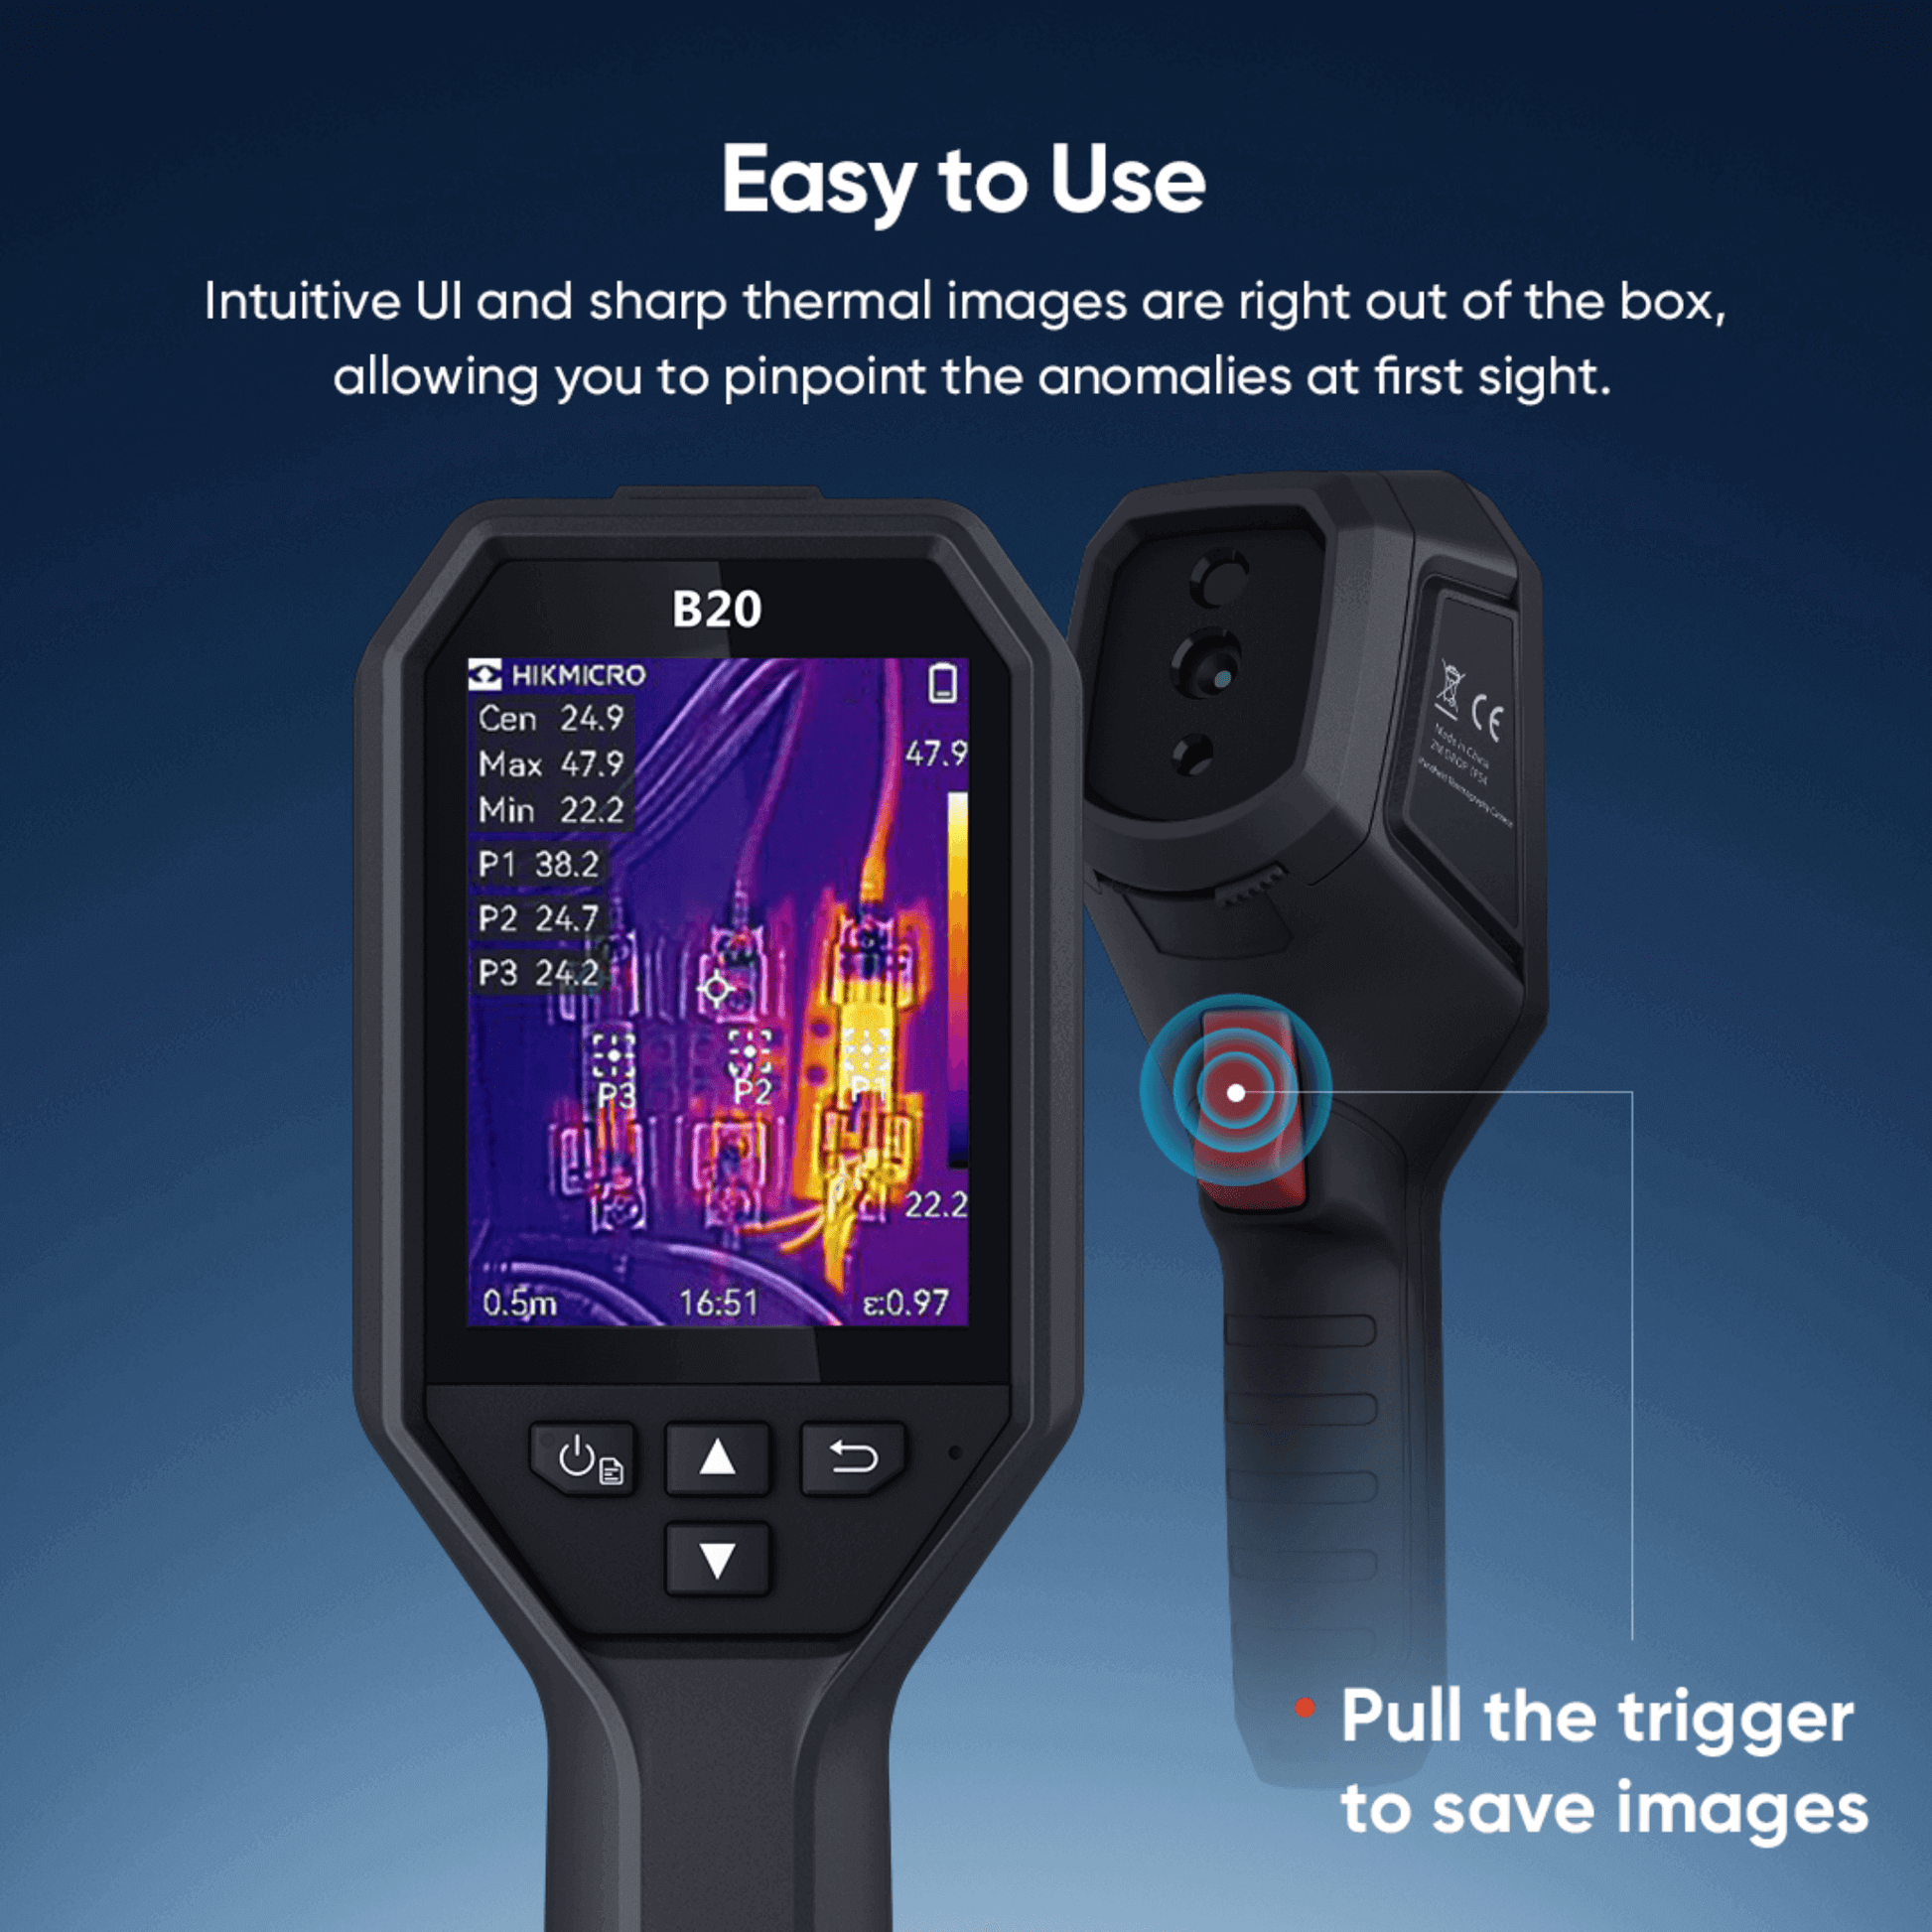 HikMicro B20 Handheld Thermal Imager Easy to use UI to pinpoint anomalies at first sight